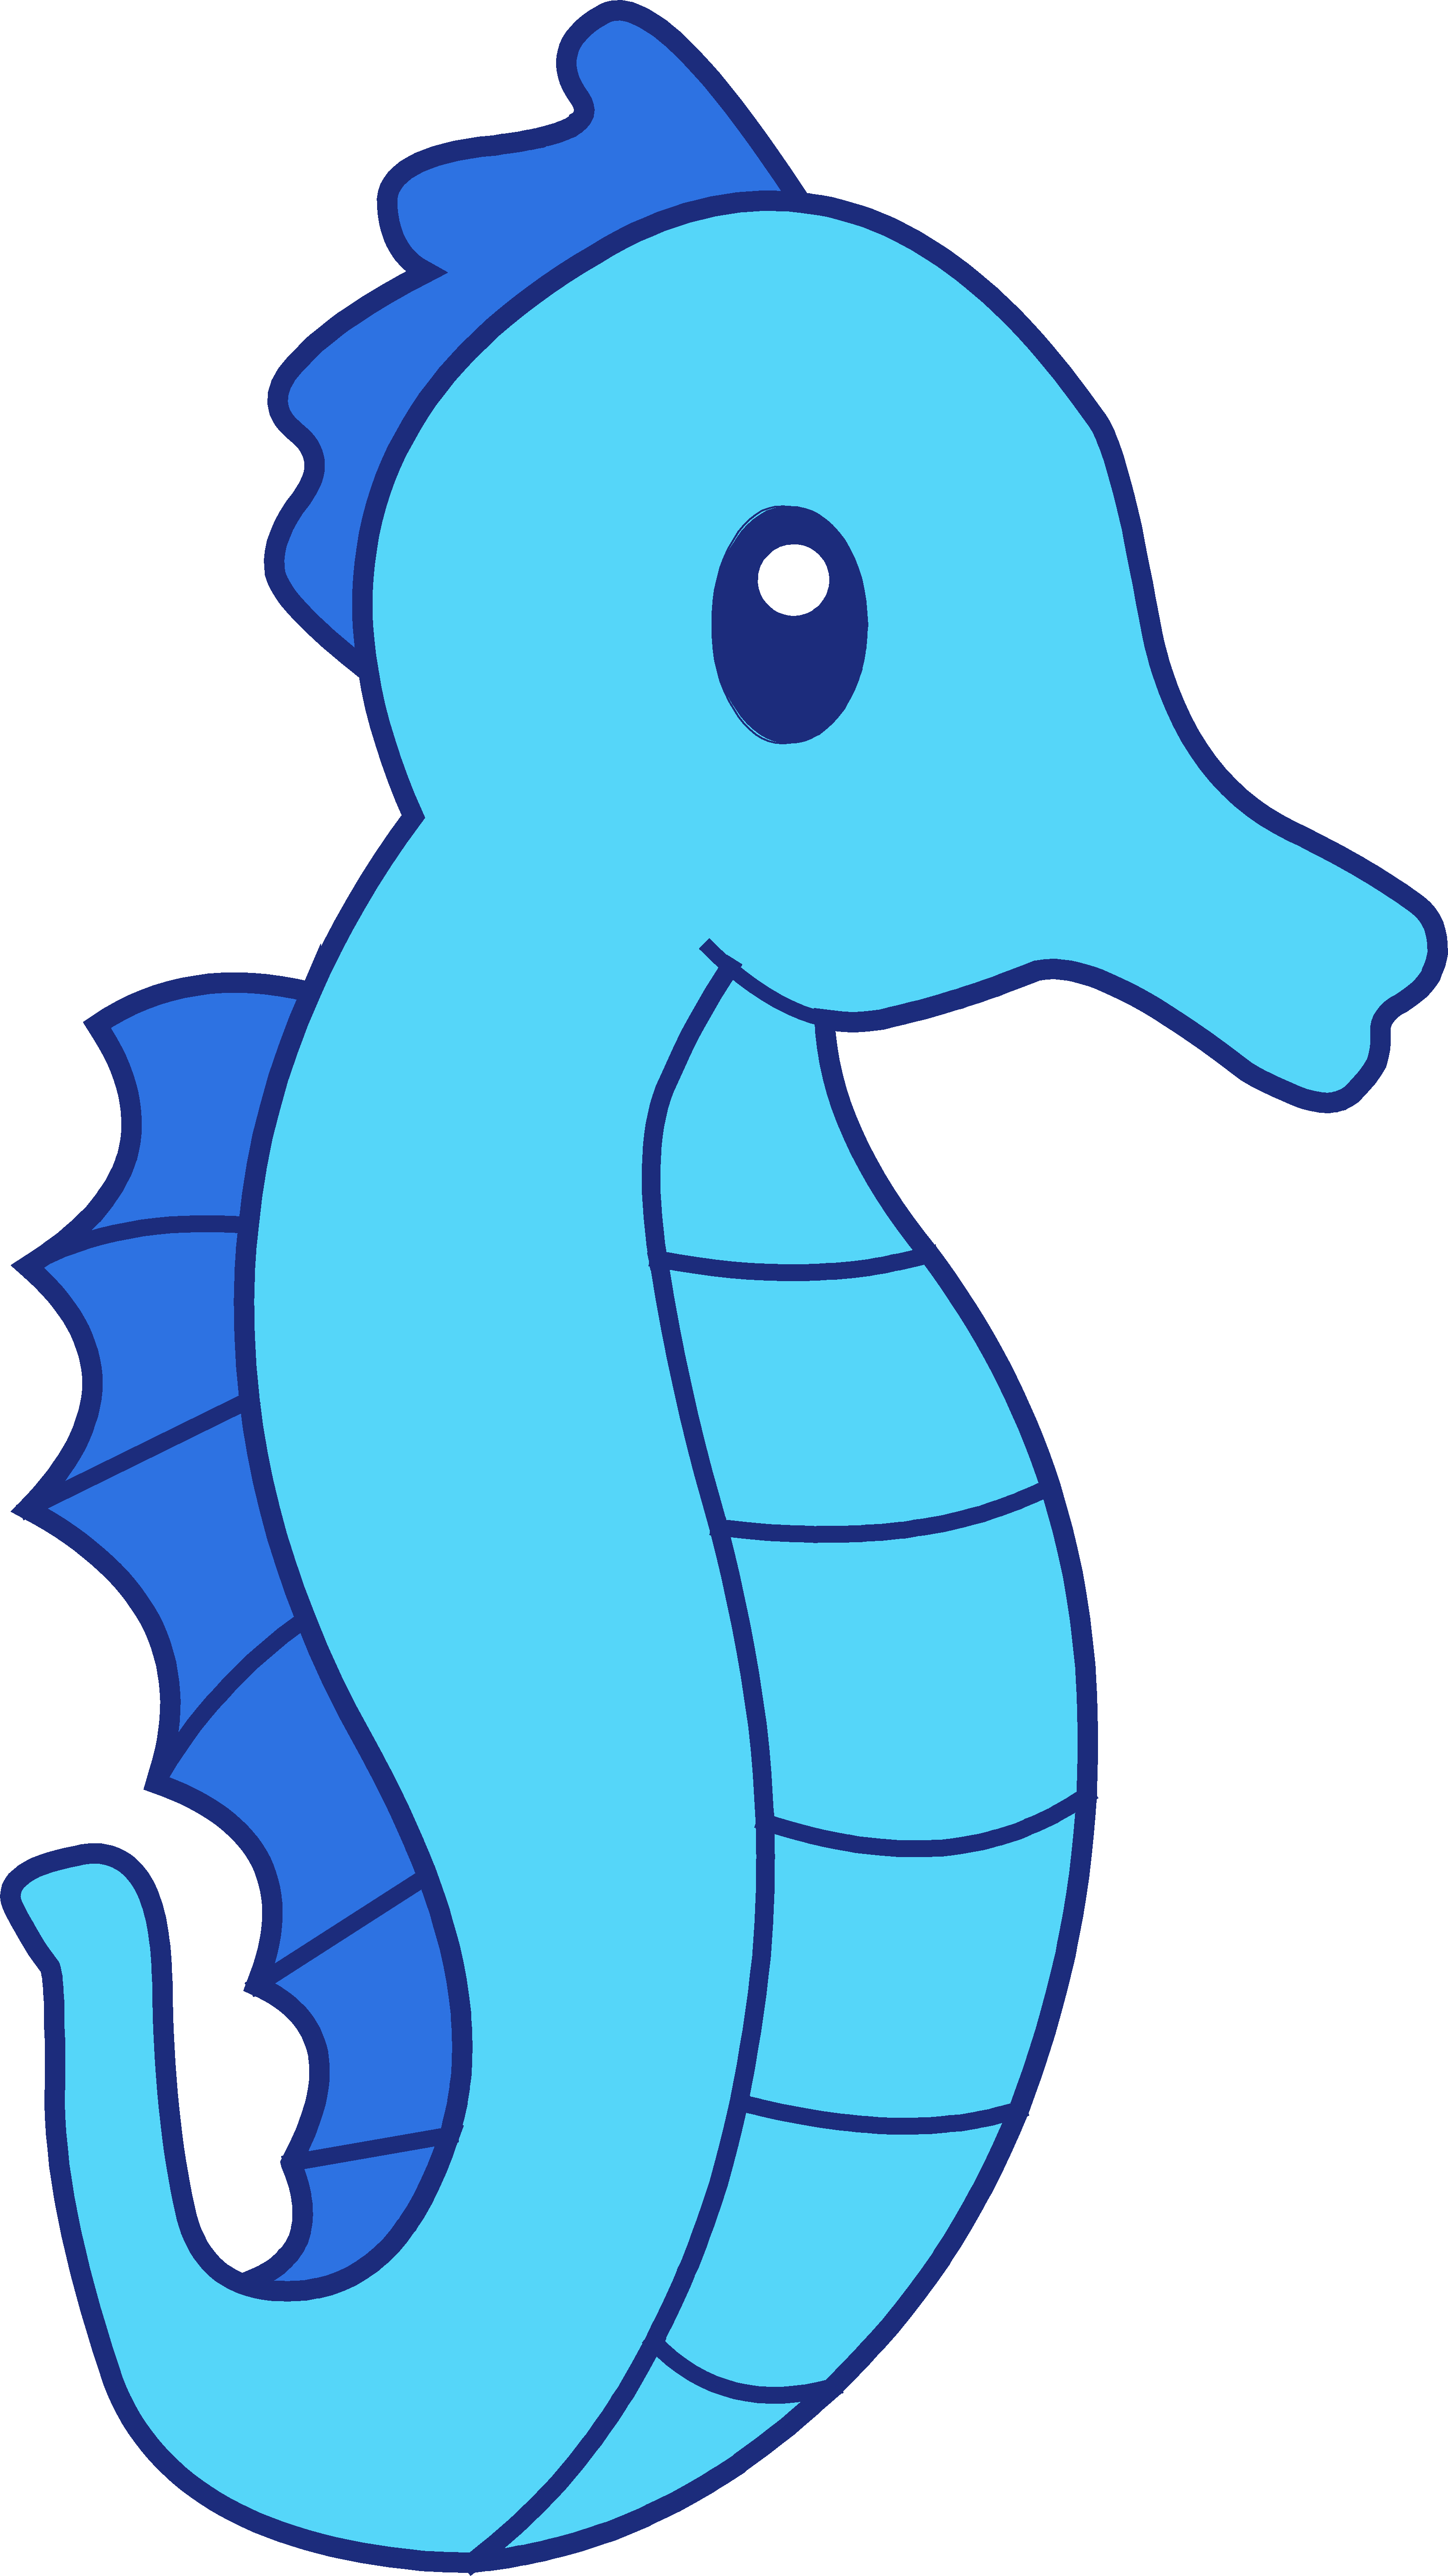 Baby Seahorse Clipart | Clipart Panda - Free Clipart Images